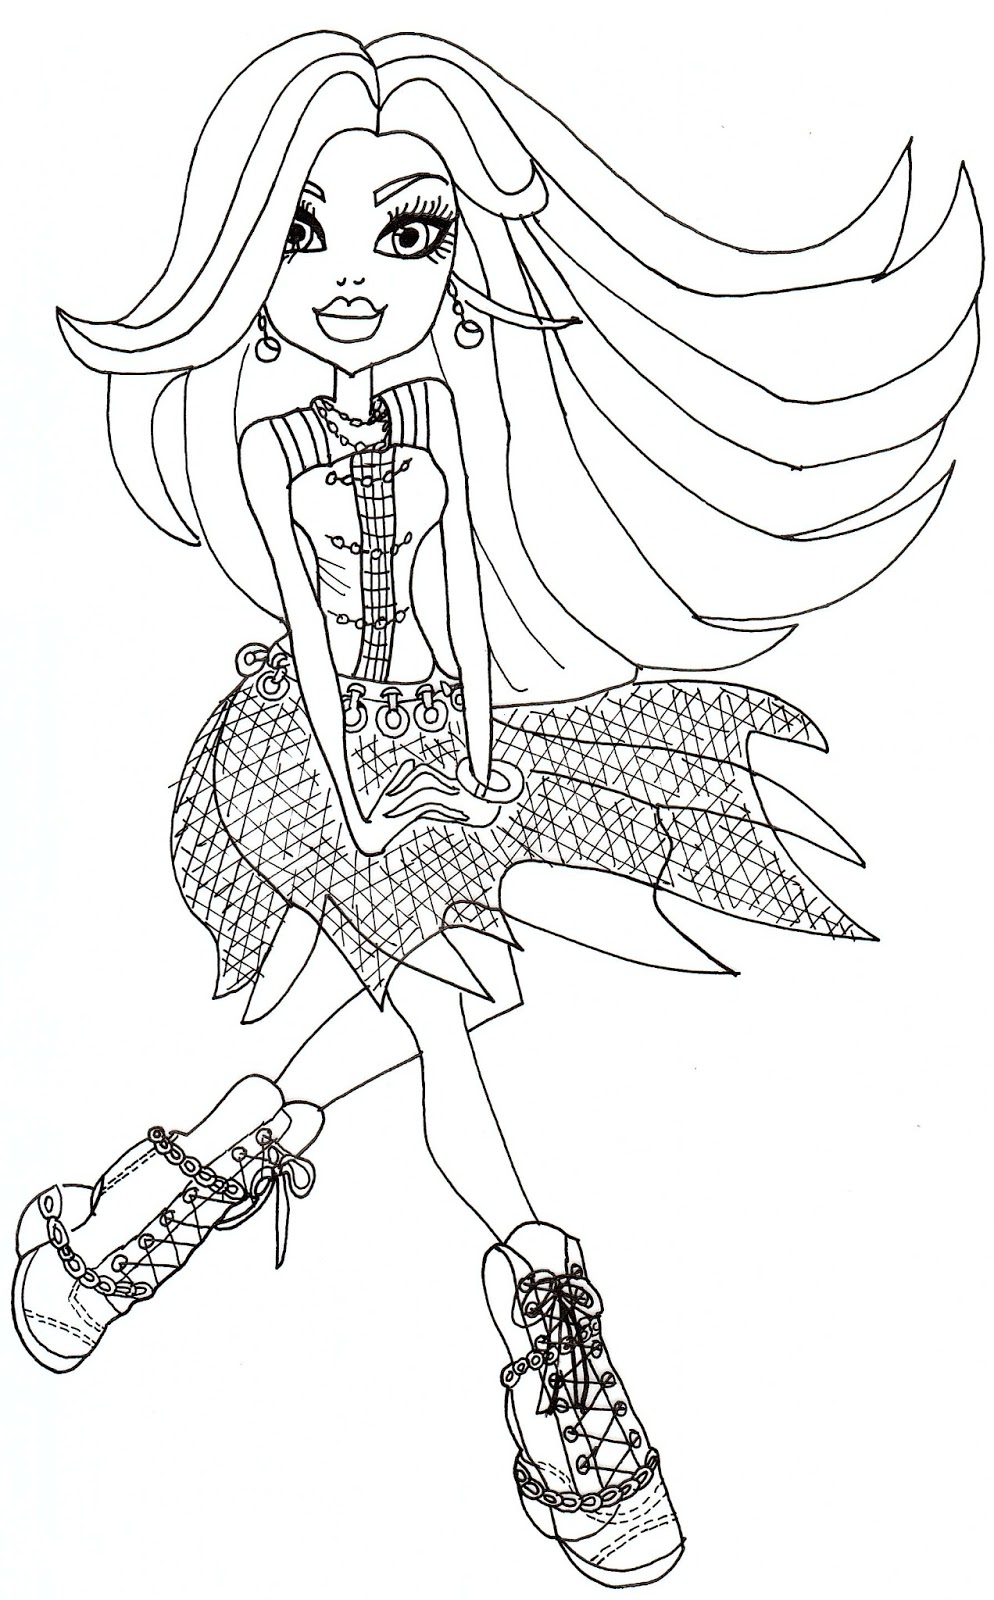 Download Free Printable Monster High Coloring Pages: Floating Spectra Coloring Page